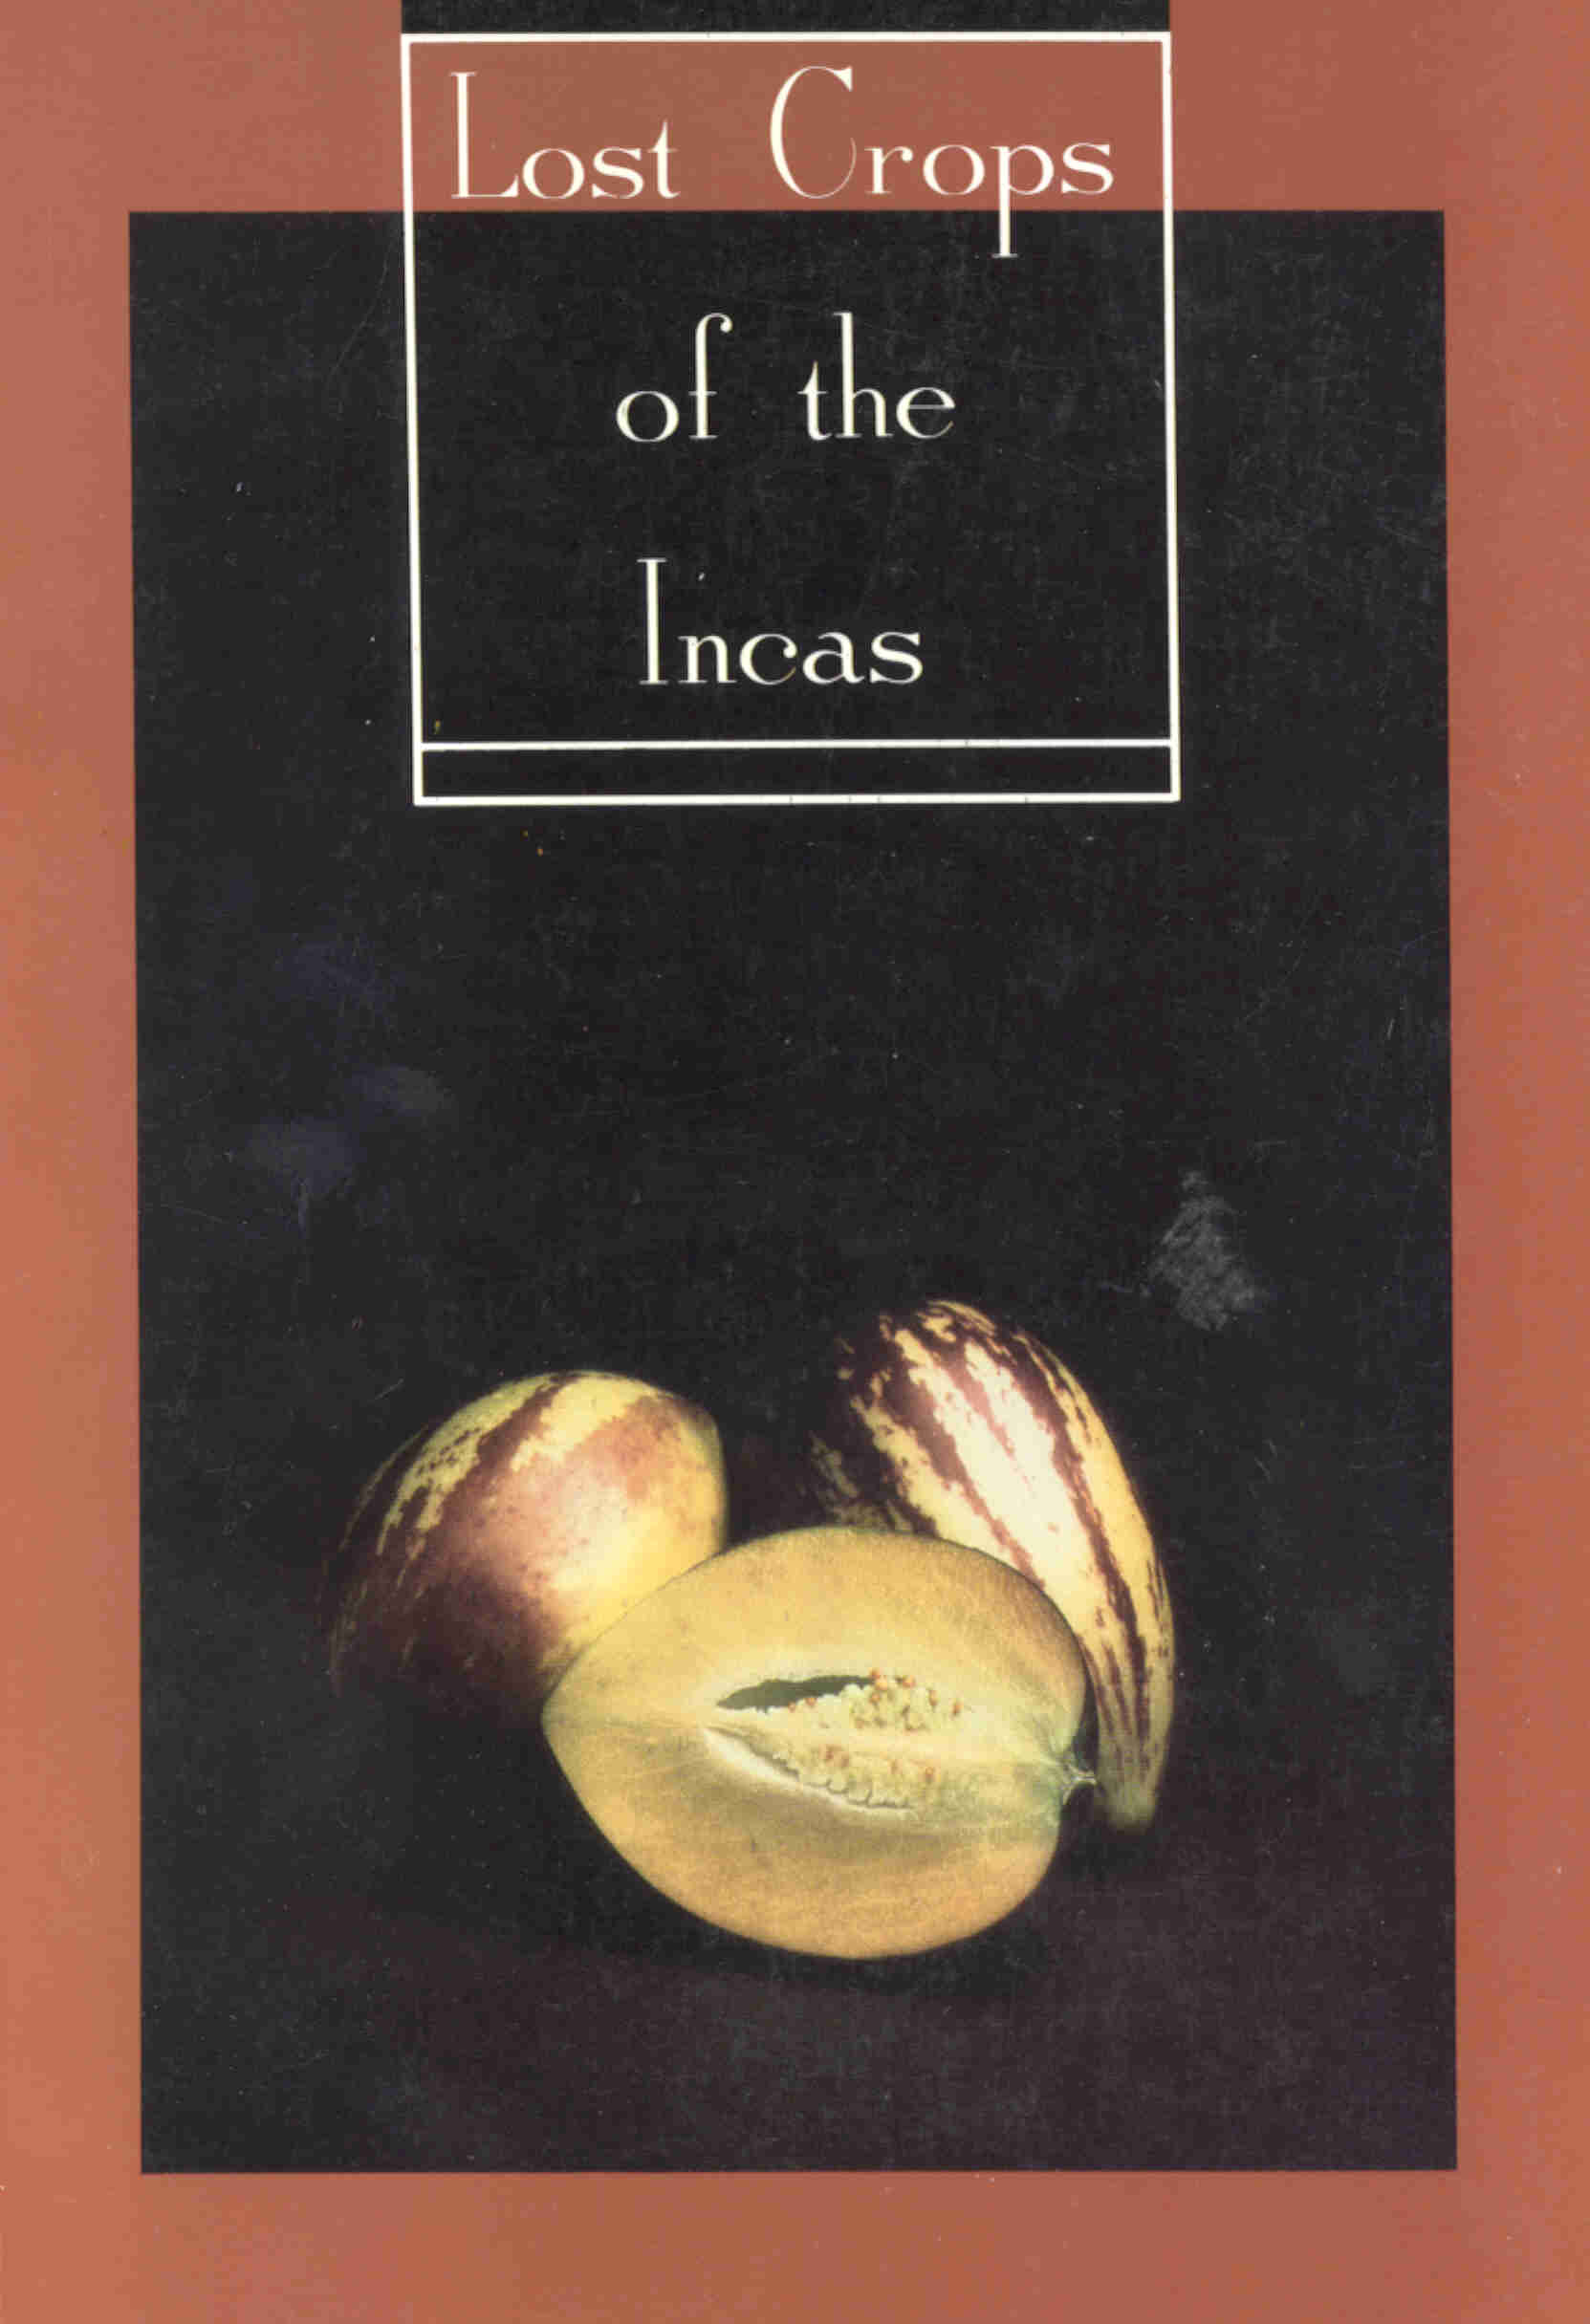 Lost Crops of the Incas, cover